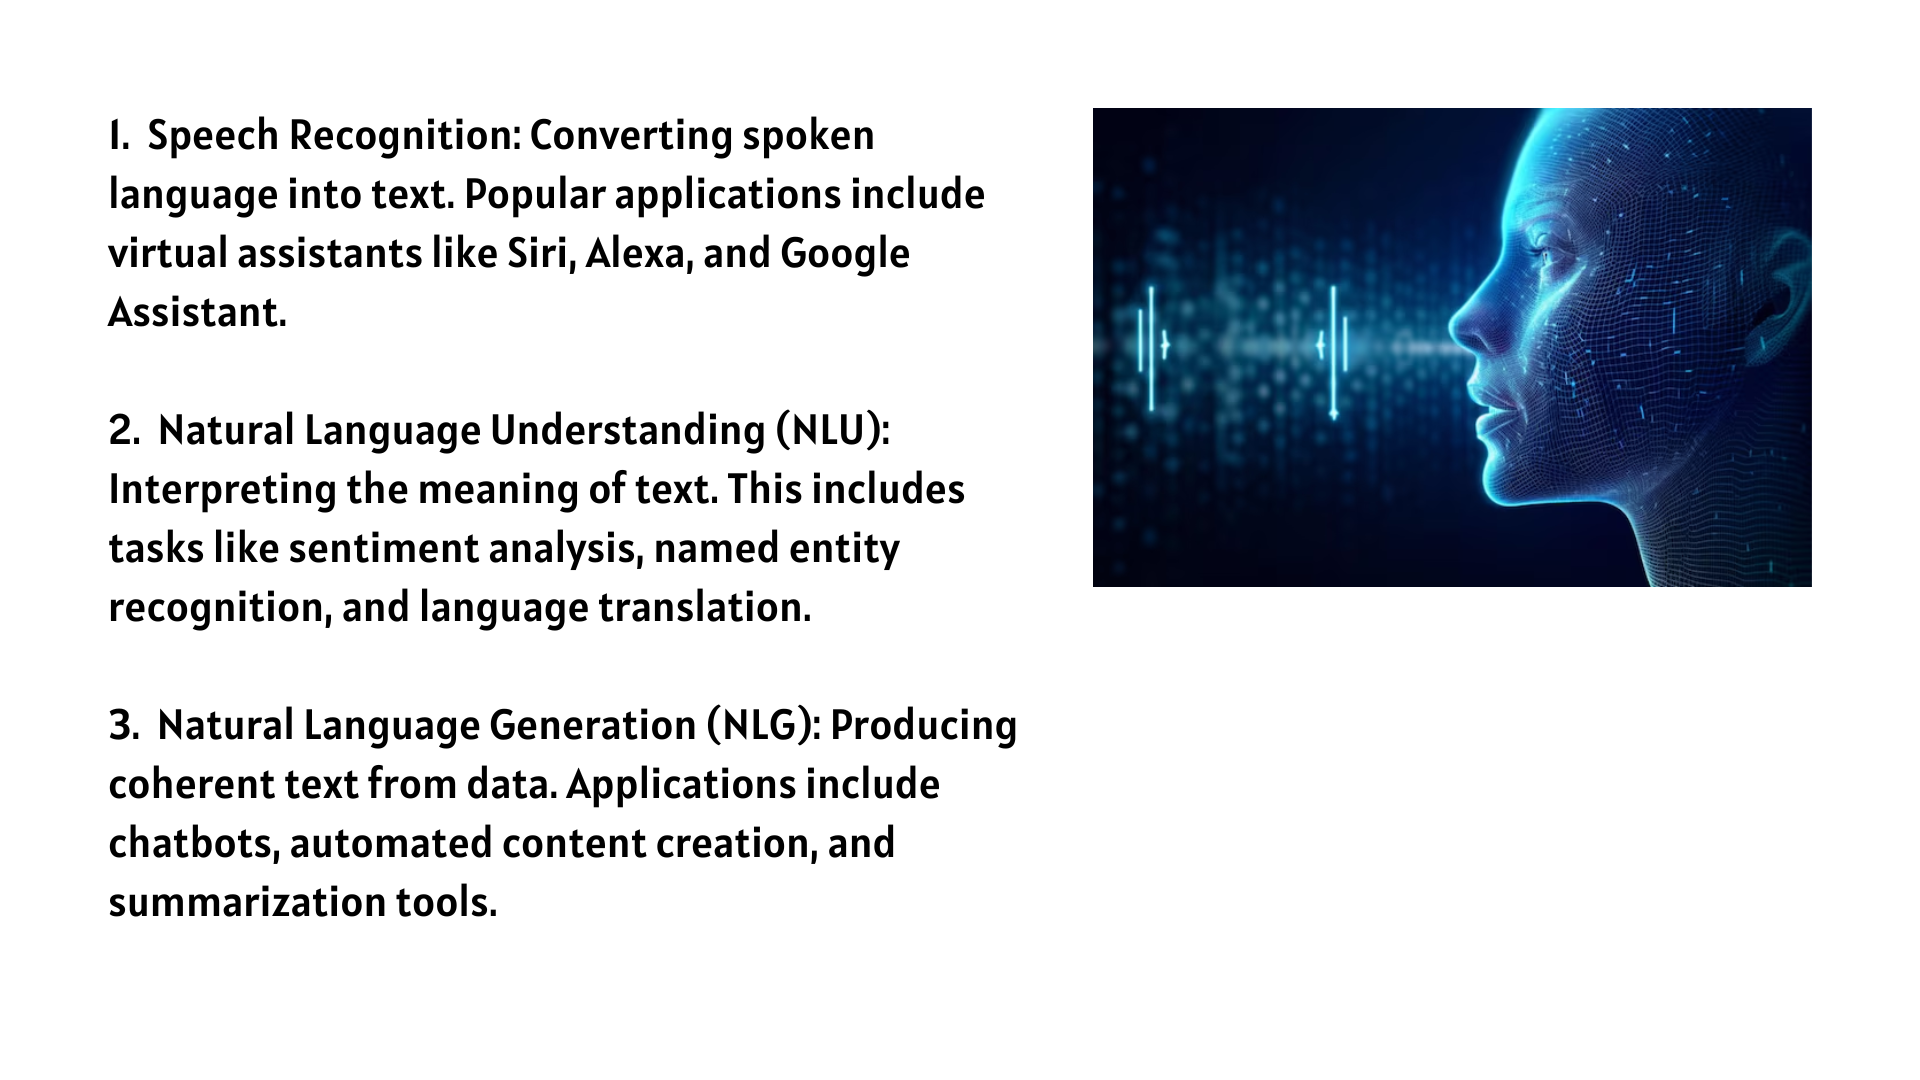 uploads/6769/1._speech_recognition_converting_spoken_language_into_text._popular_applications_include_virtual_assistants_like_siri,_alexa,_and_google_assistant._2._natural_language_understanding_(nlu)_interpre.png